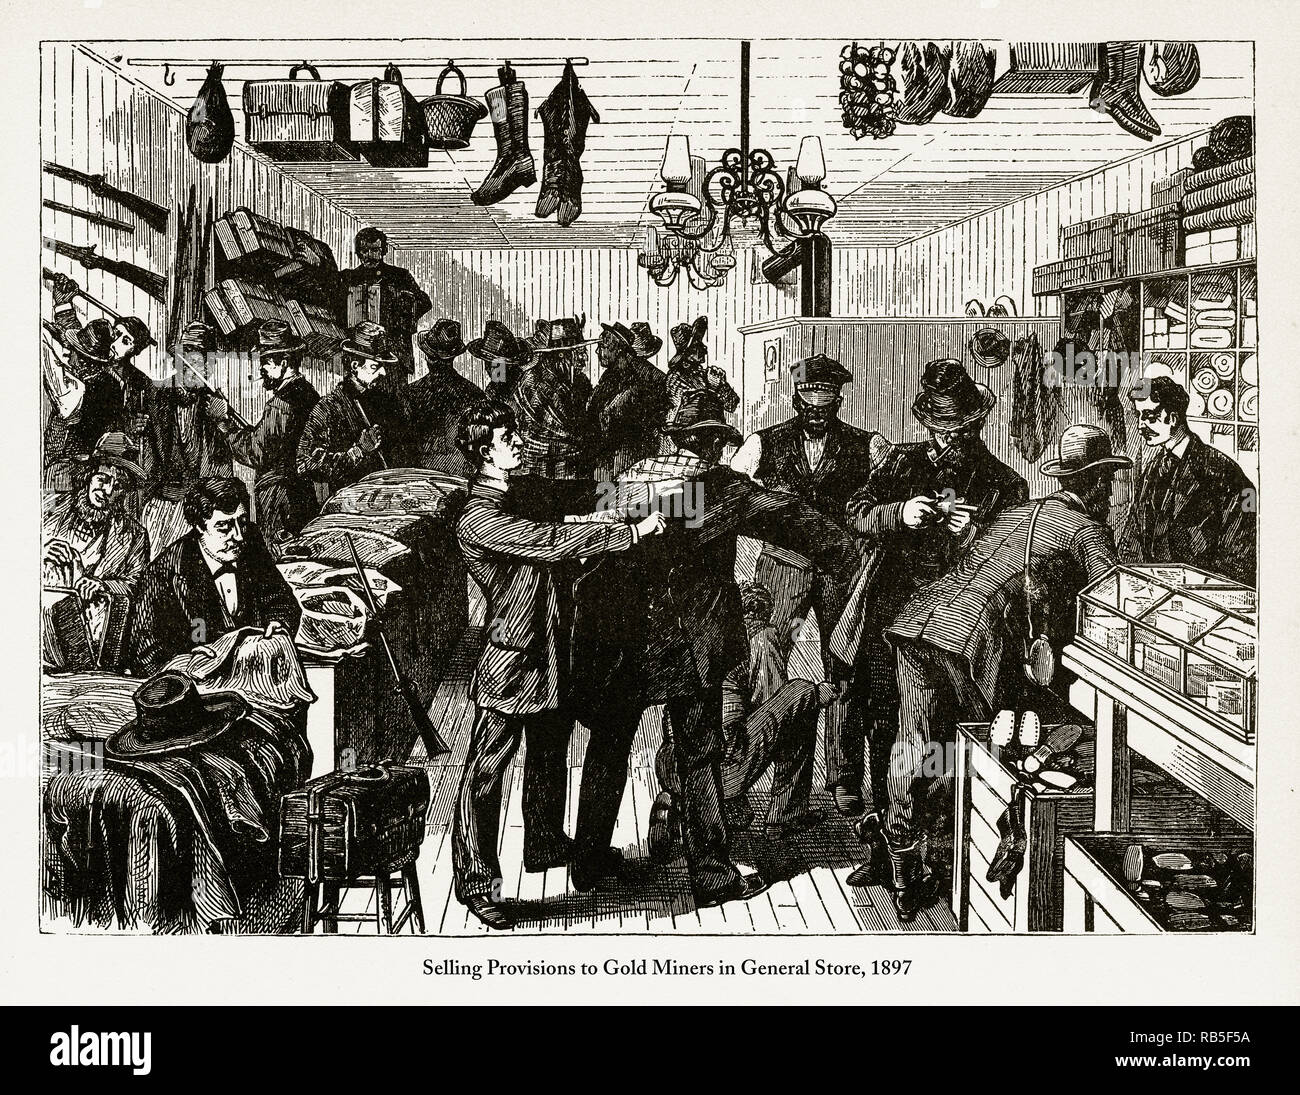 Selling Provisions to Gold Miners in General Store Engraving, 1897 Stock Photo